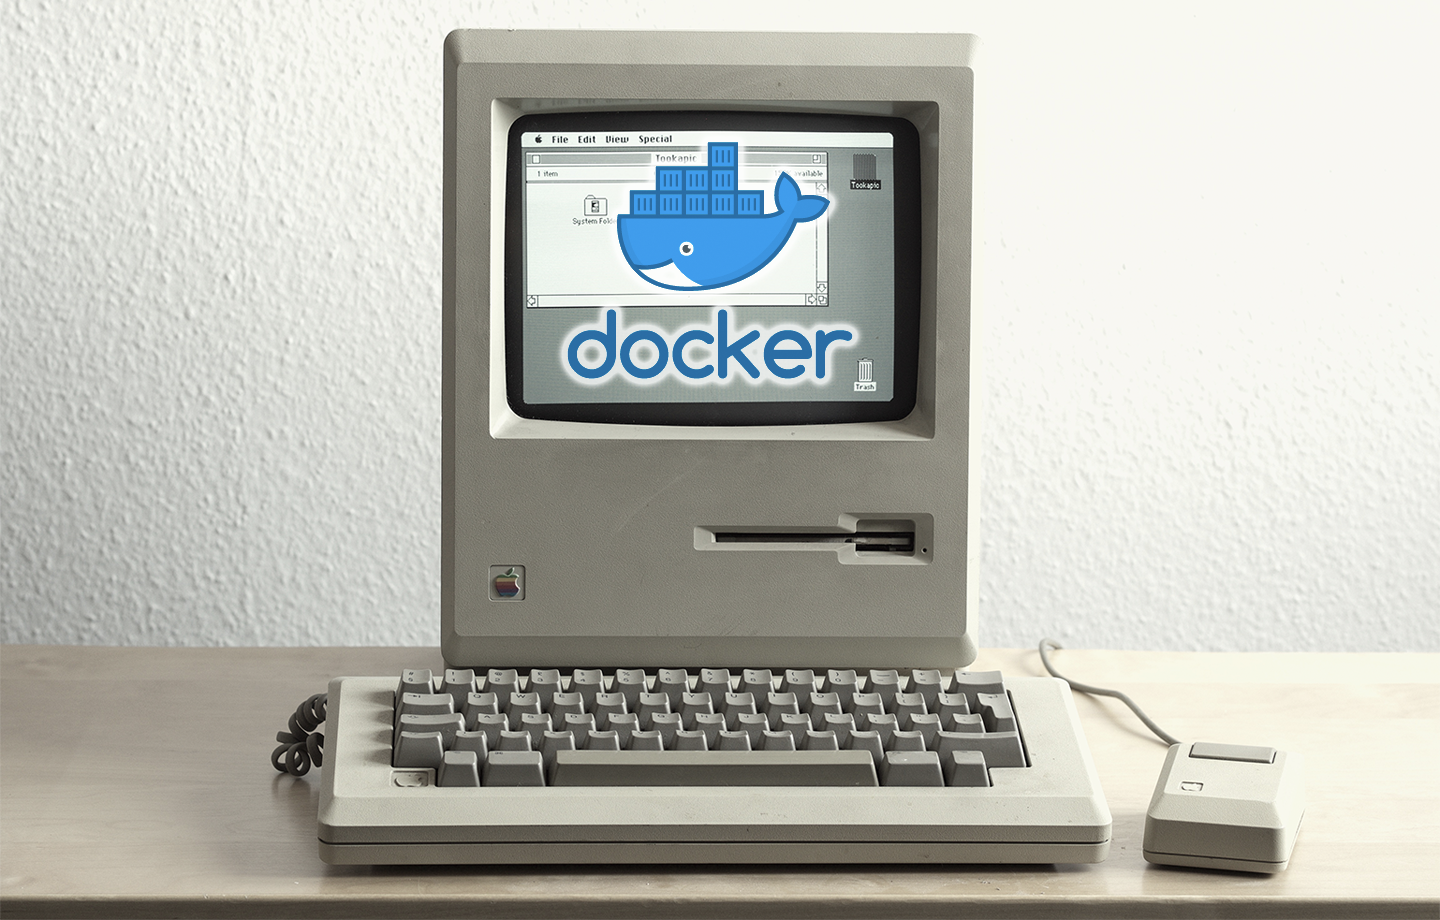 What Can You Do With Docker For Mac